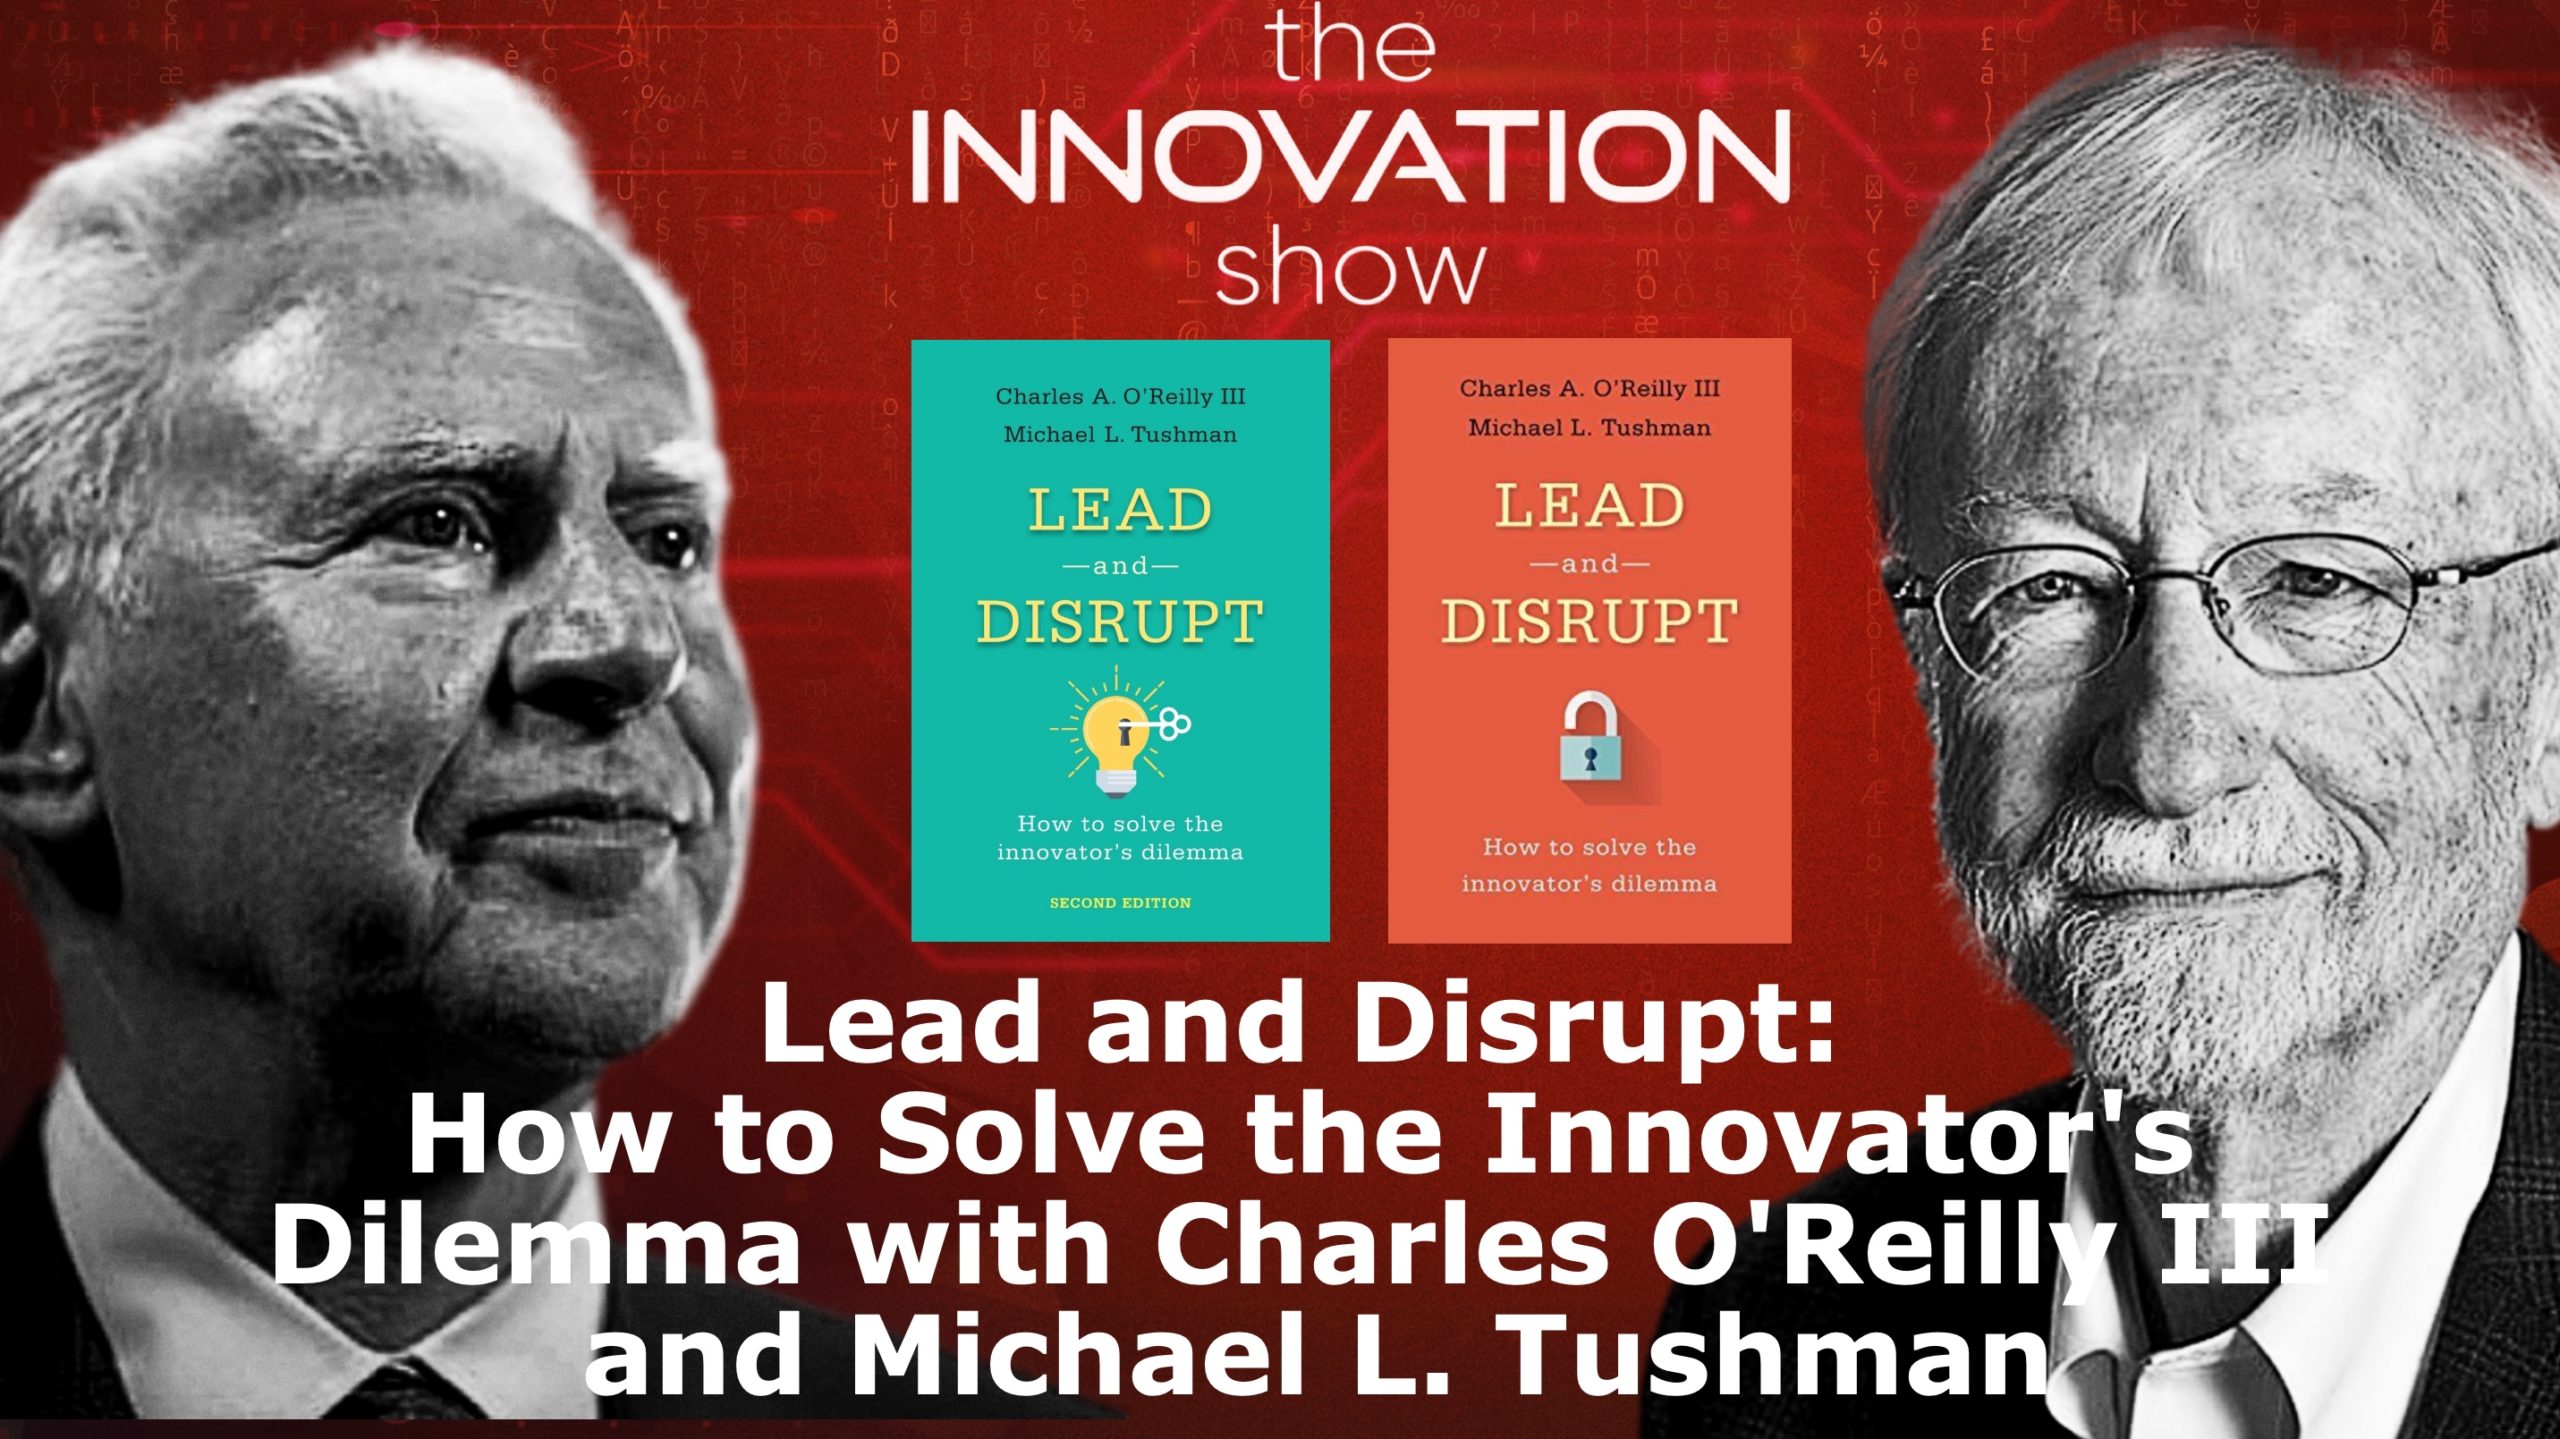 Lead and Disrupt_ How to Solve the Innovator's Dilemma with Charles O'Reilly III and Michael L. Tushman LGE